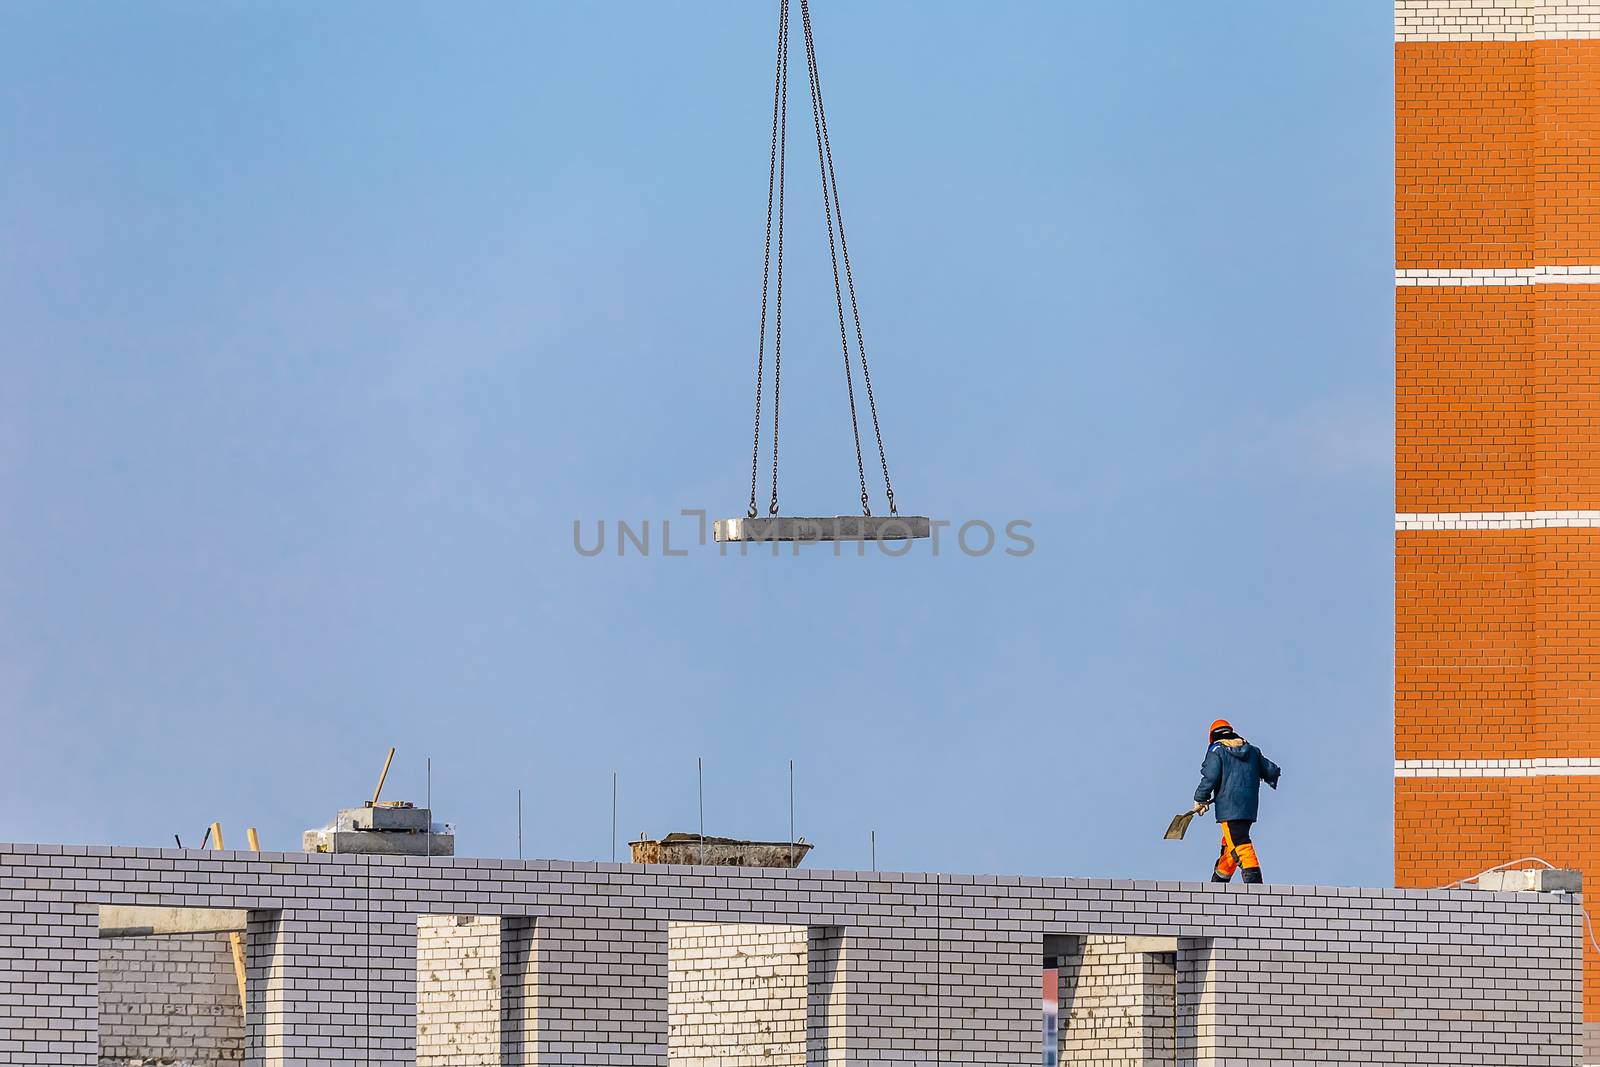 View of Construction Site. Worker Walking with a Shovel. Background With Blue Sky, Unfinished Apartment Building, Crane Chains